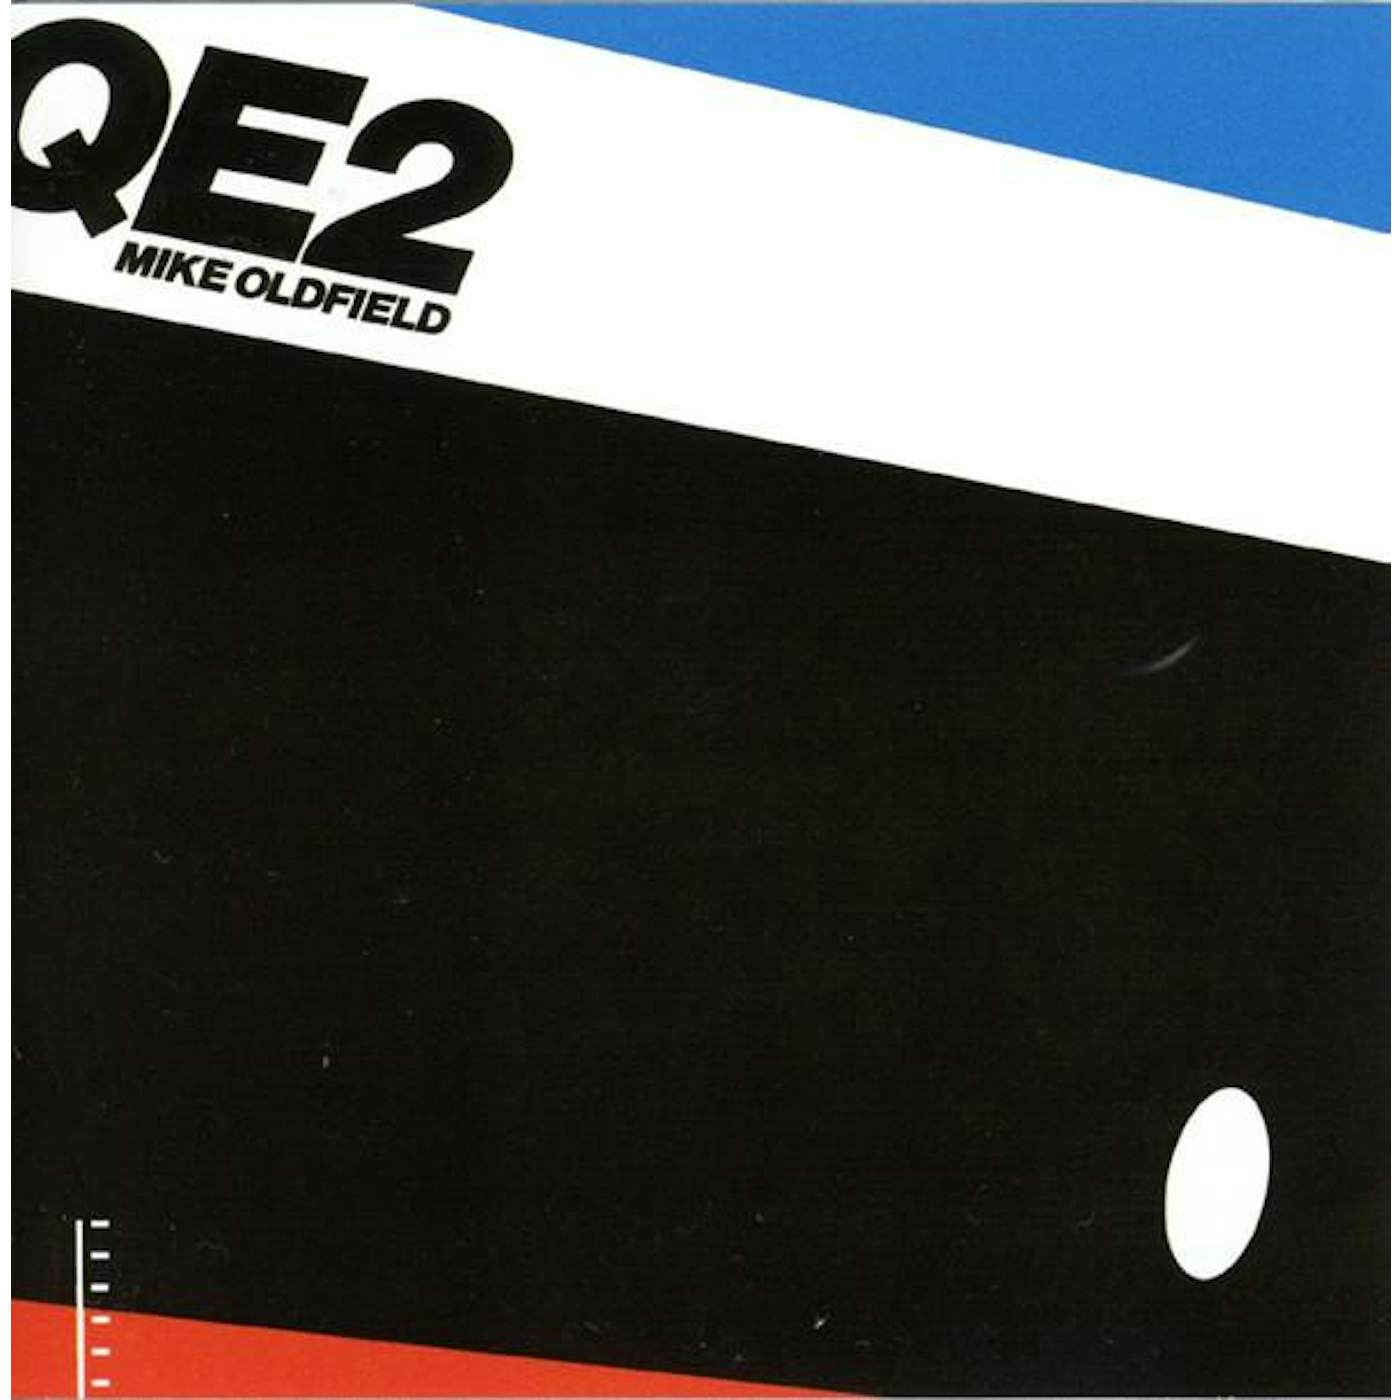 Mike Oldfield QE2 CD